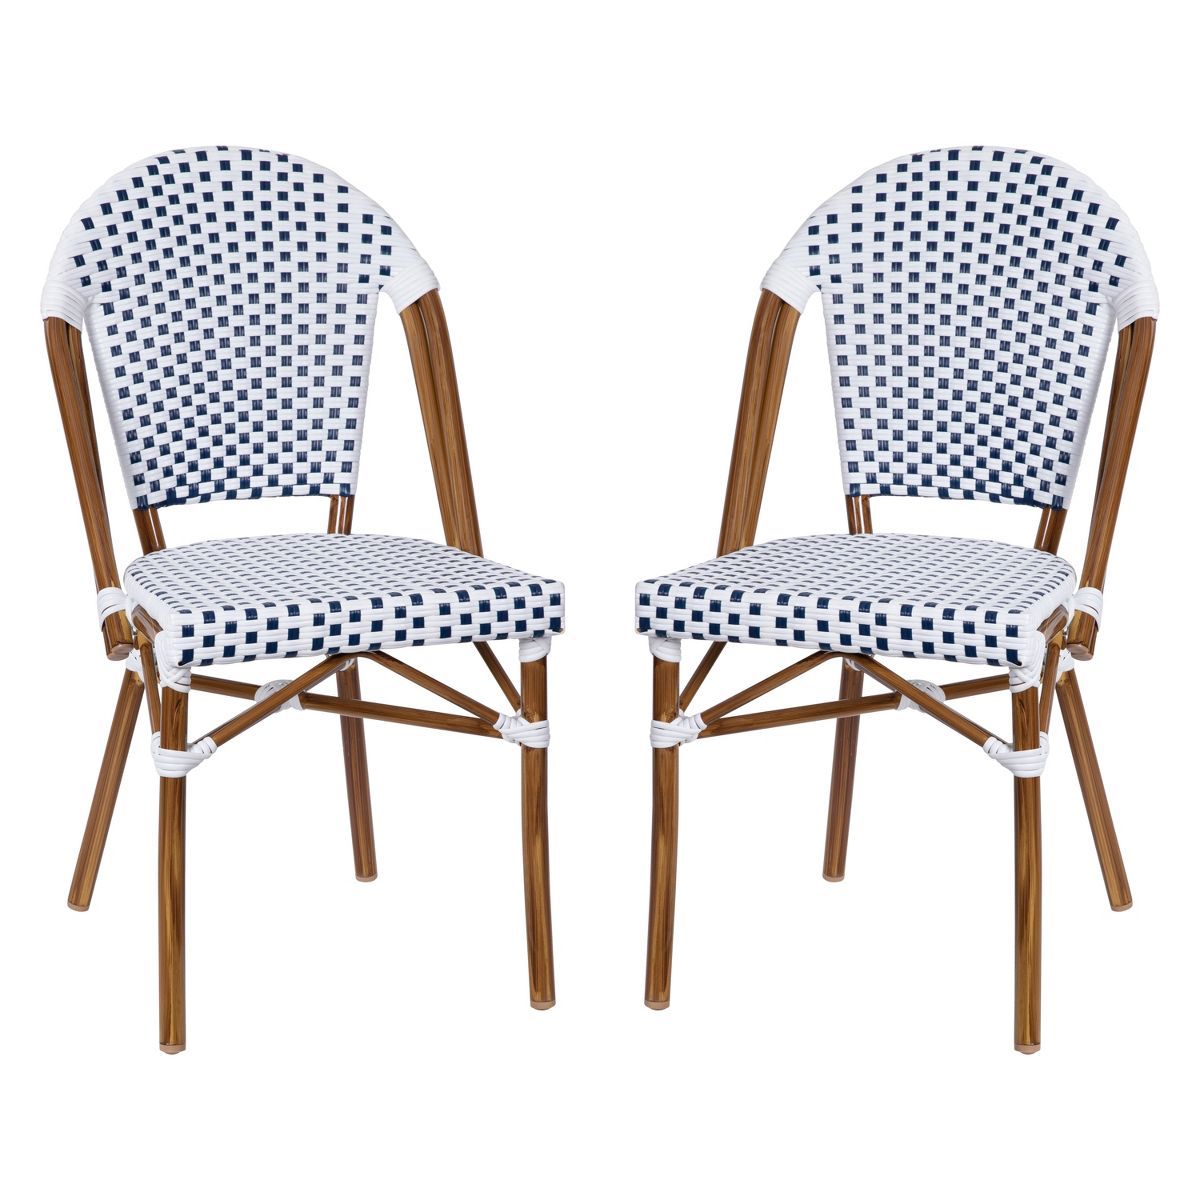 Merrick Lane Indoor/Outdoor Stacking French Bistro Chair with Aluminum Frame | Target